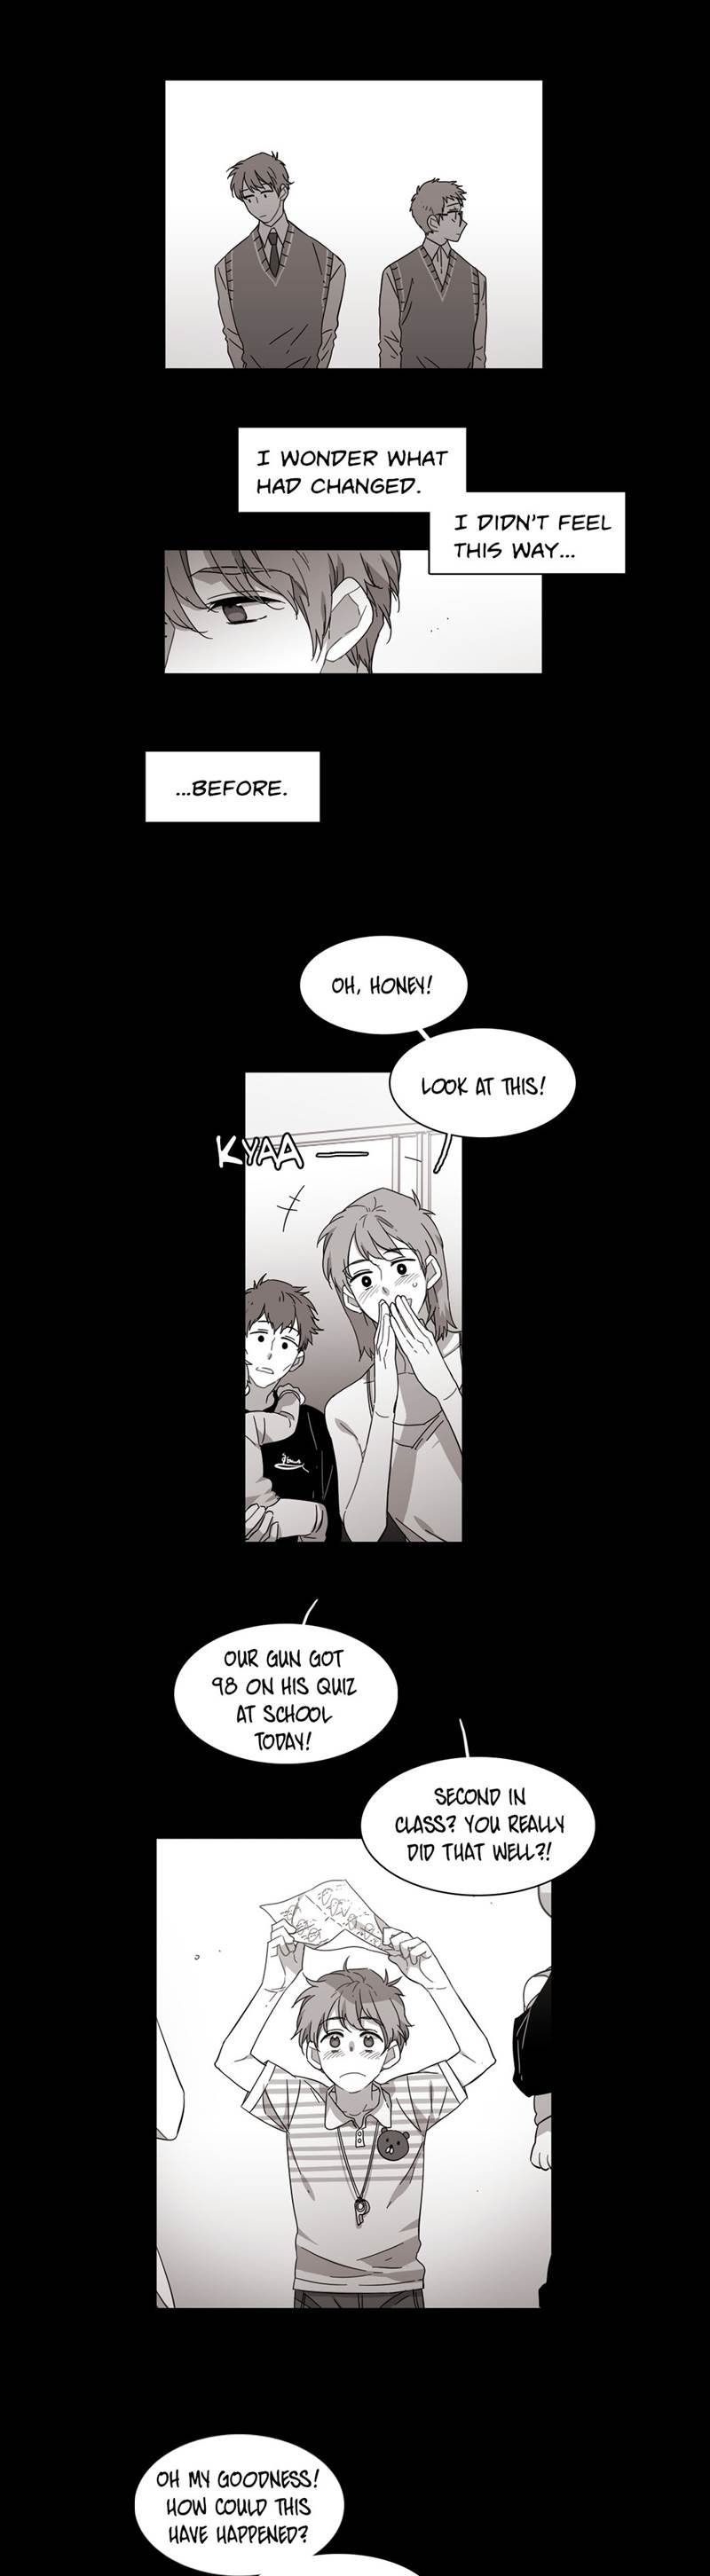 Unstoppable Siblings - episode 124 - 3